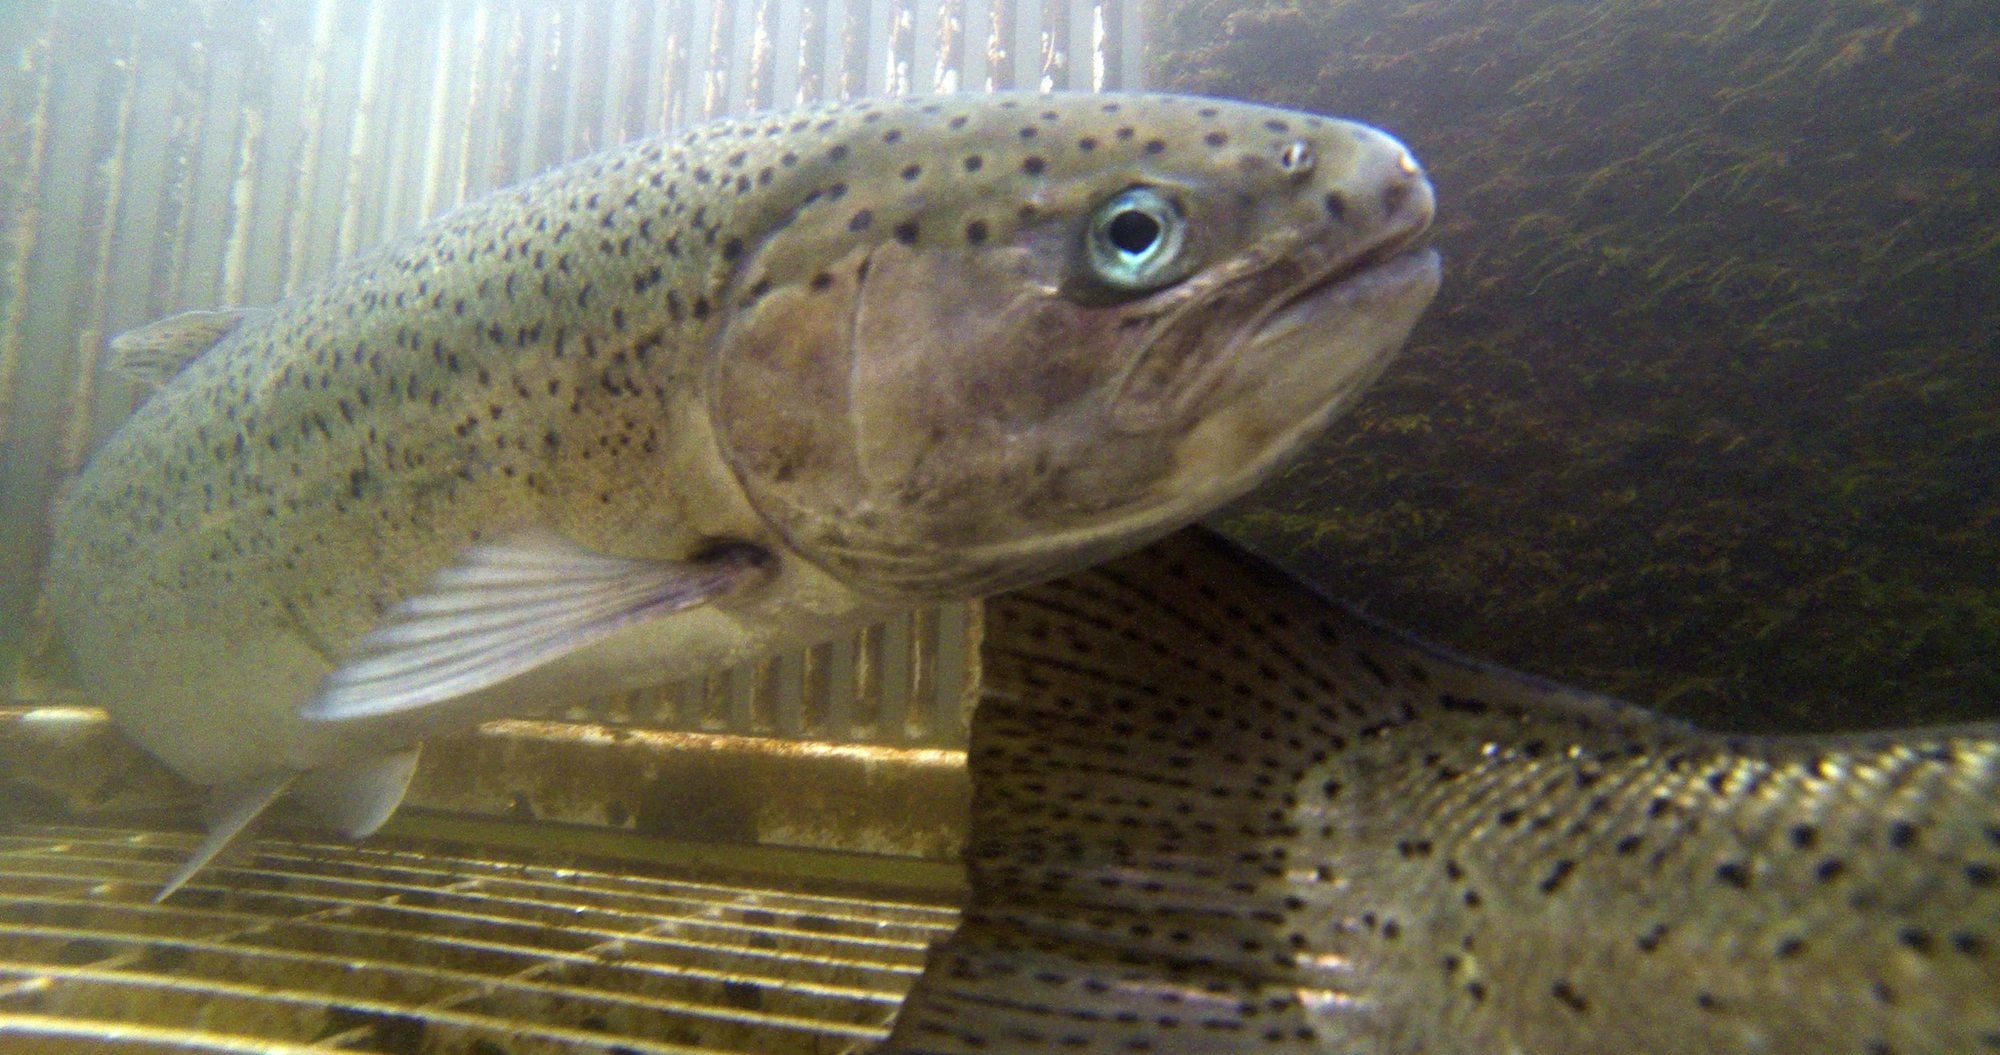 Summer steelhead from Skamania Hatchery on the North Fork of the Washougal River would continue to be released in five locations.